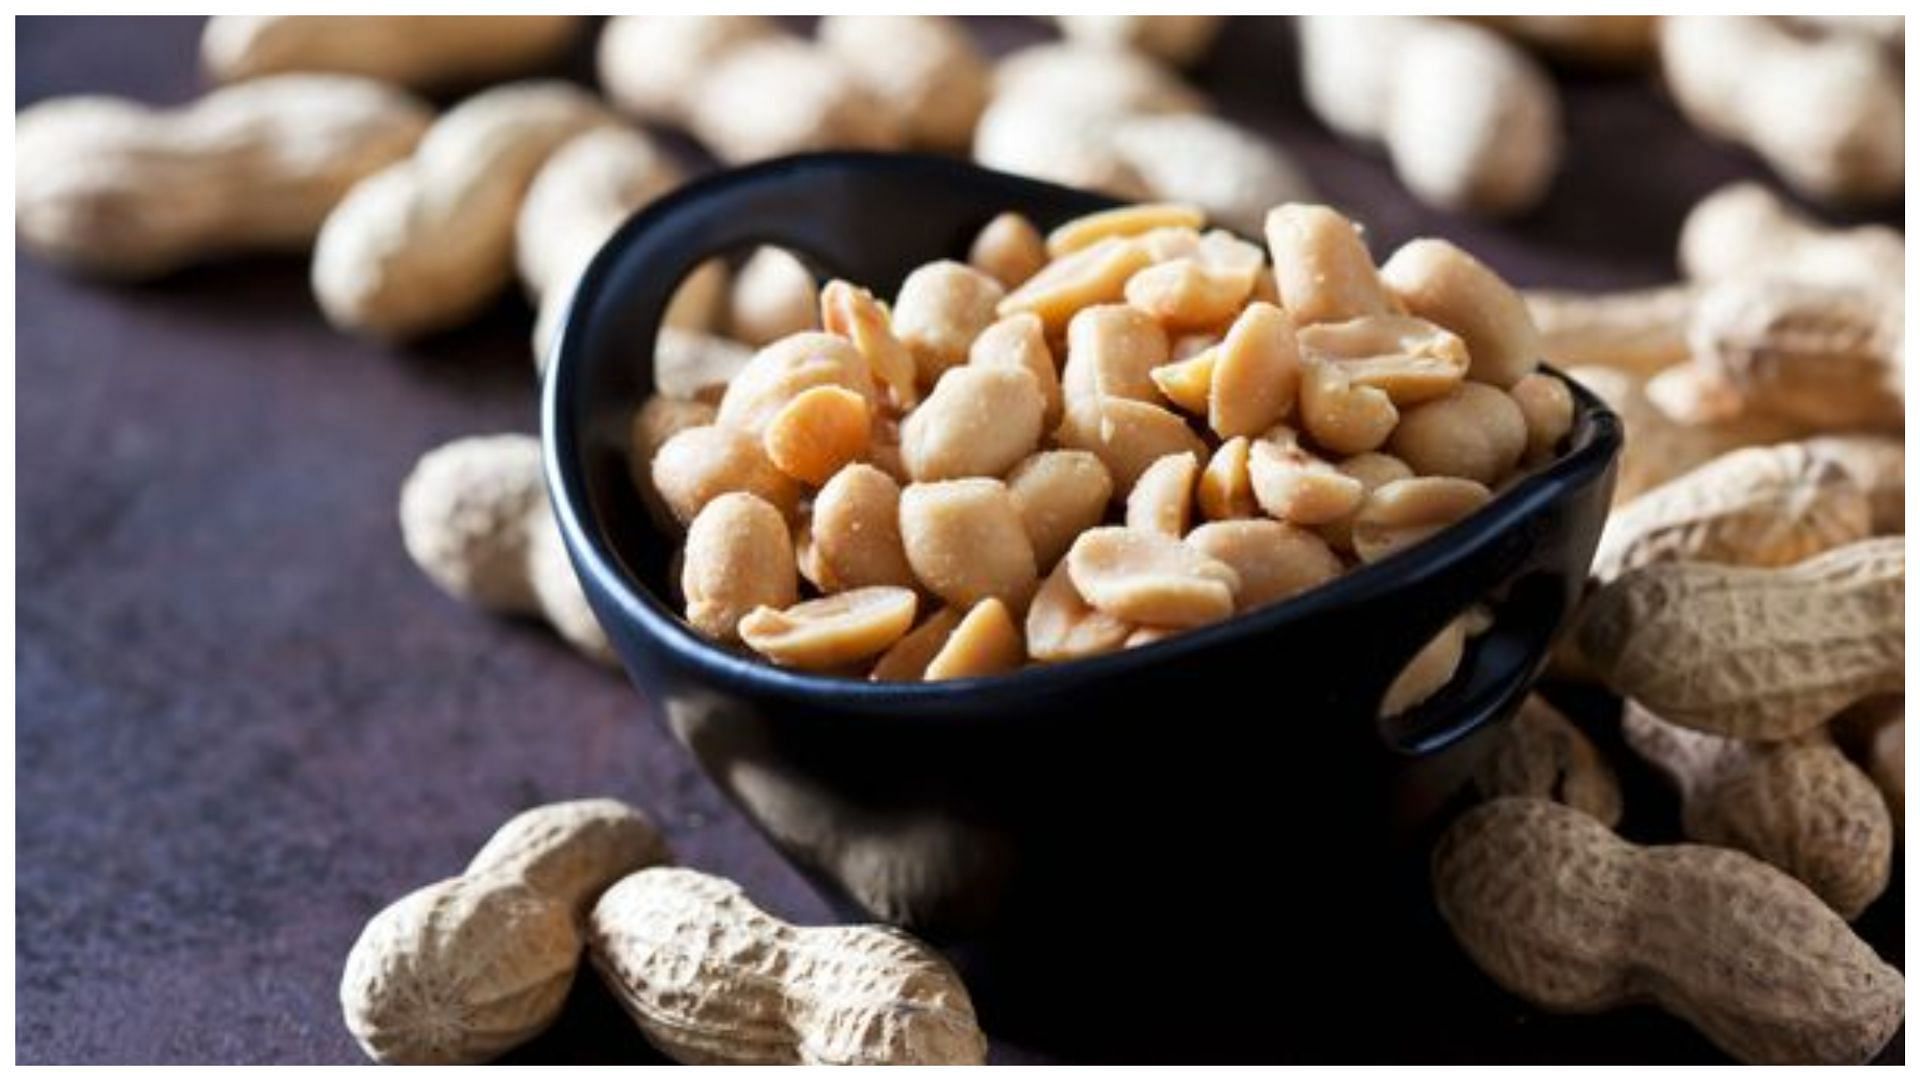 Consumption of peanuts can be life-threatening to anyone with peanut allergies (image via Getty Images)